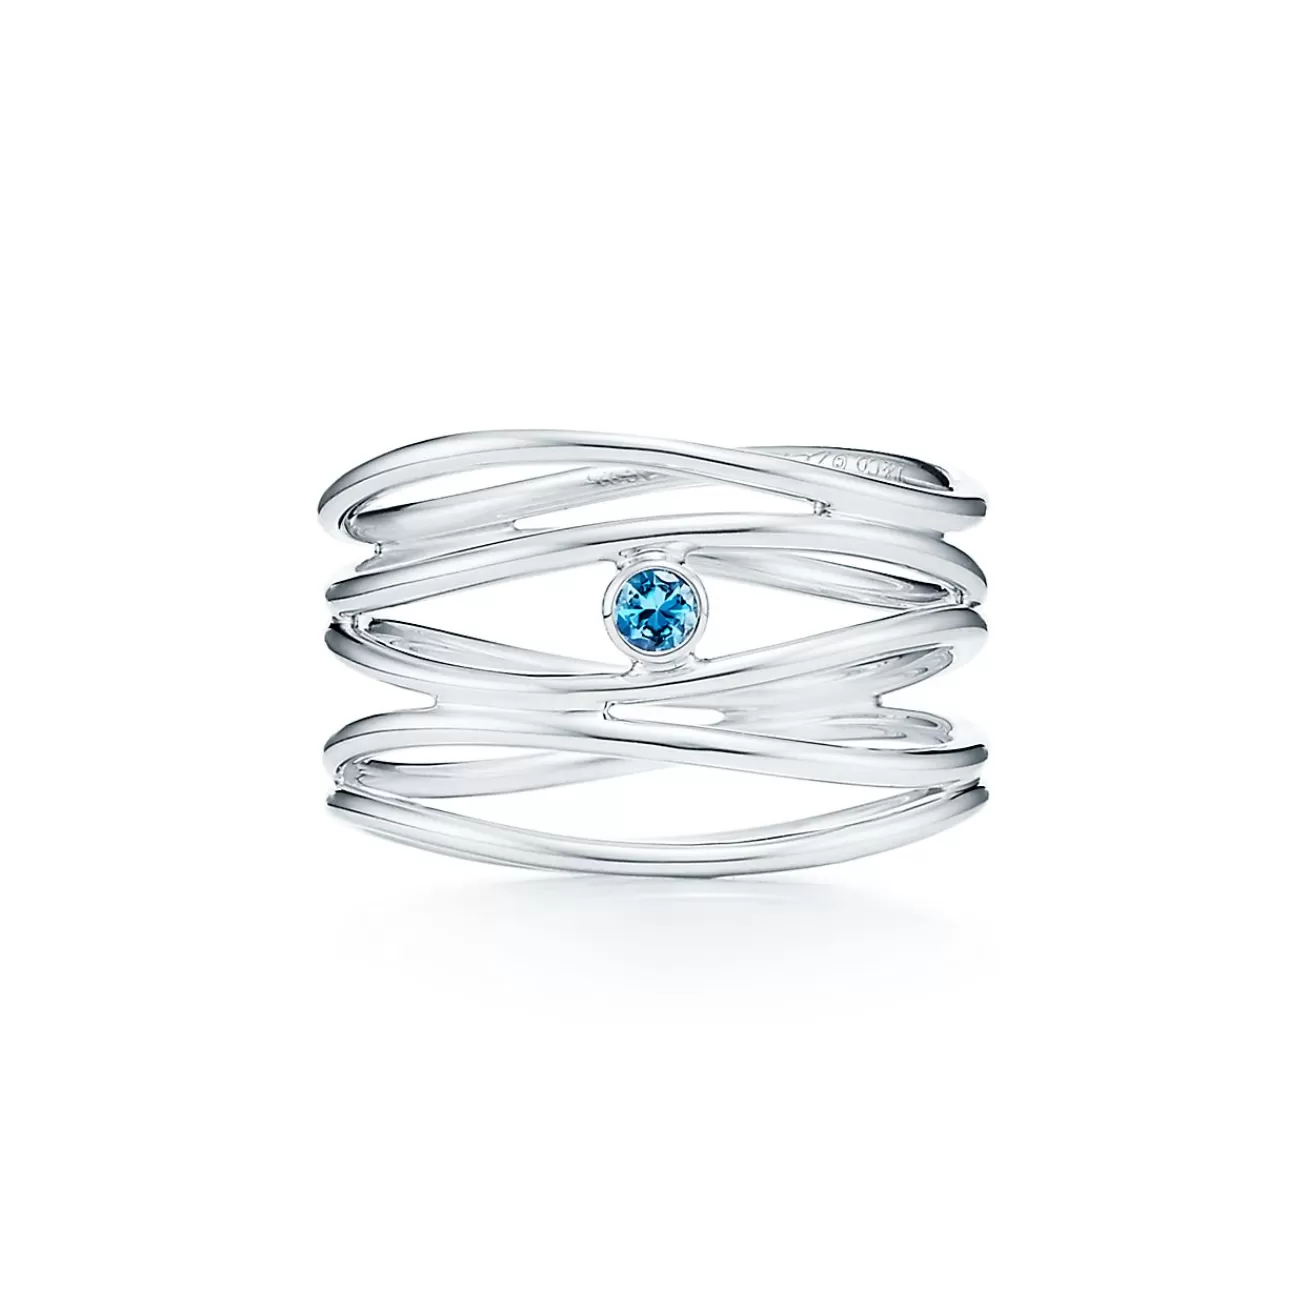 Tiffany & Co. Elsa Peretti® Wave five-row ring in sterling silver with an aquamarine. | ^ Rings | Sterling Silver Jewelry